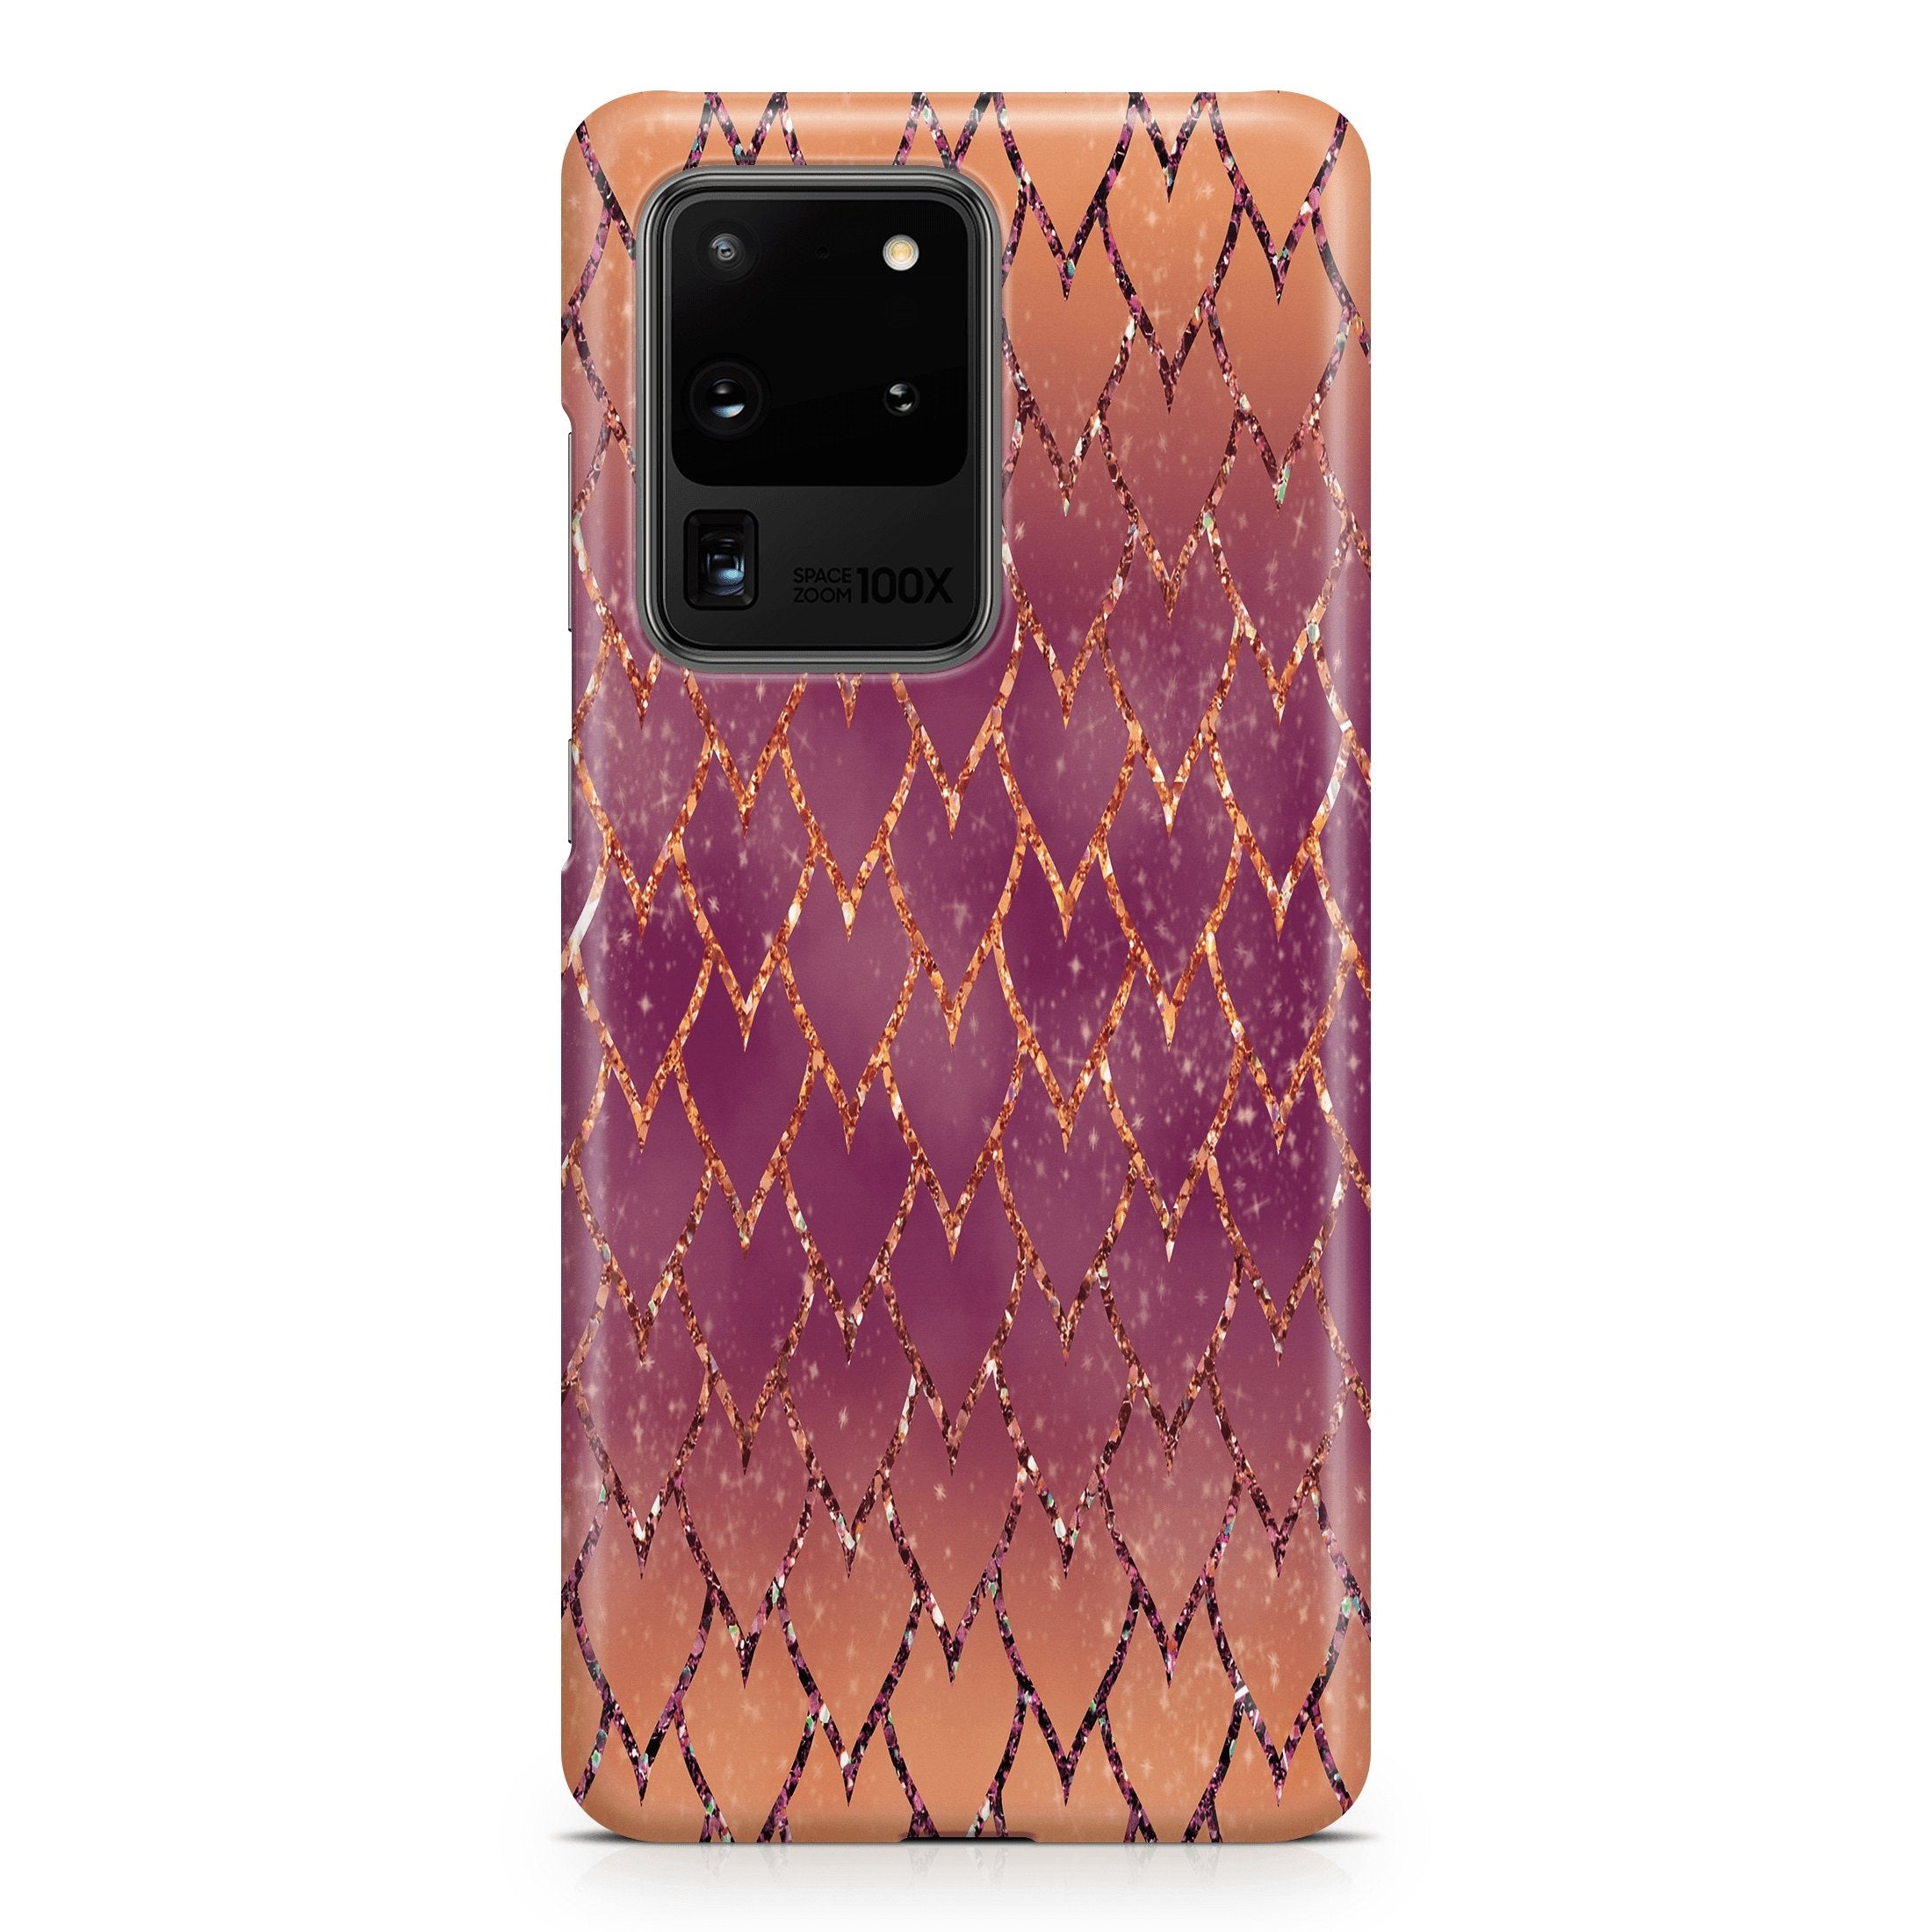 Pumpkin Spice Dragonscale - Samsung phone case designs by CaseSwagger